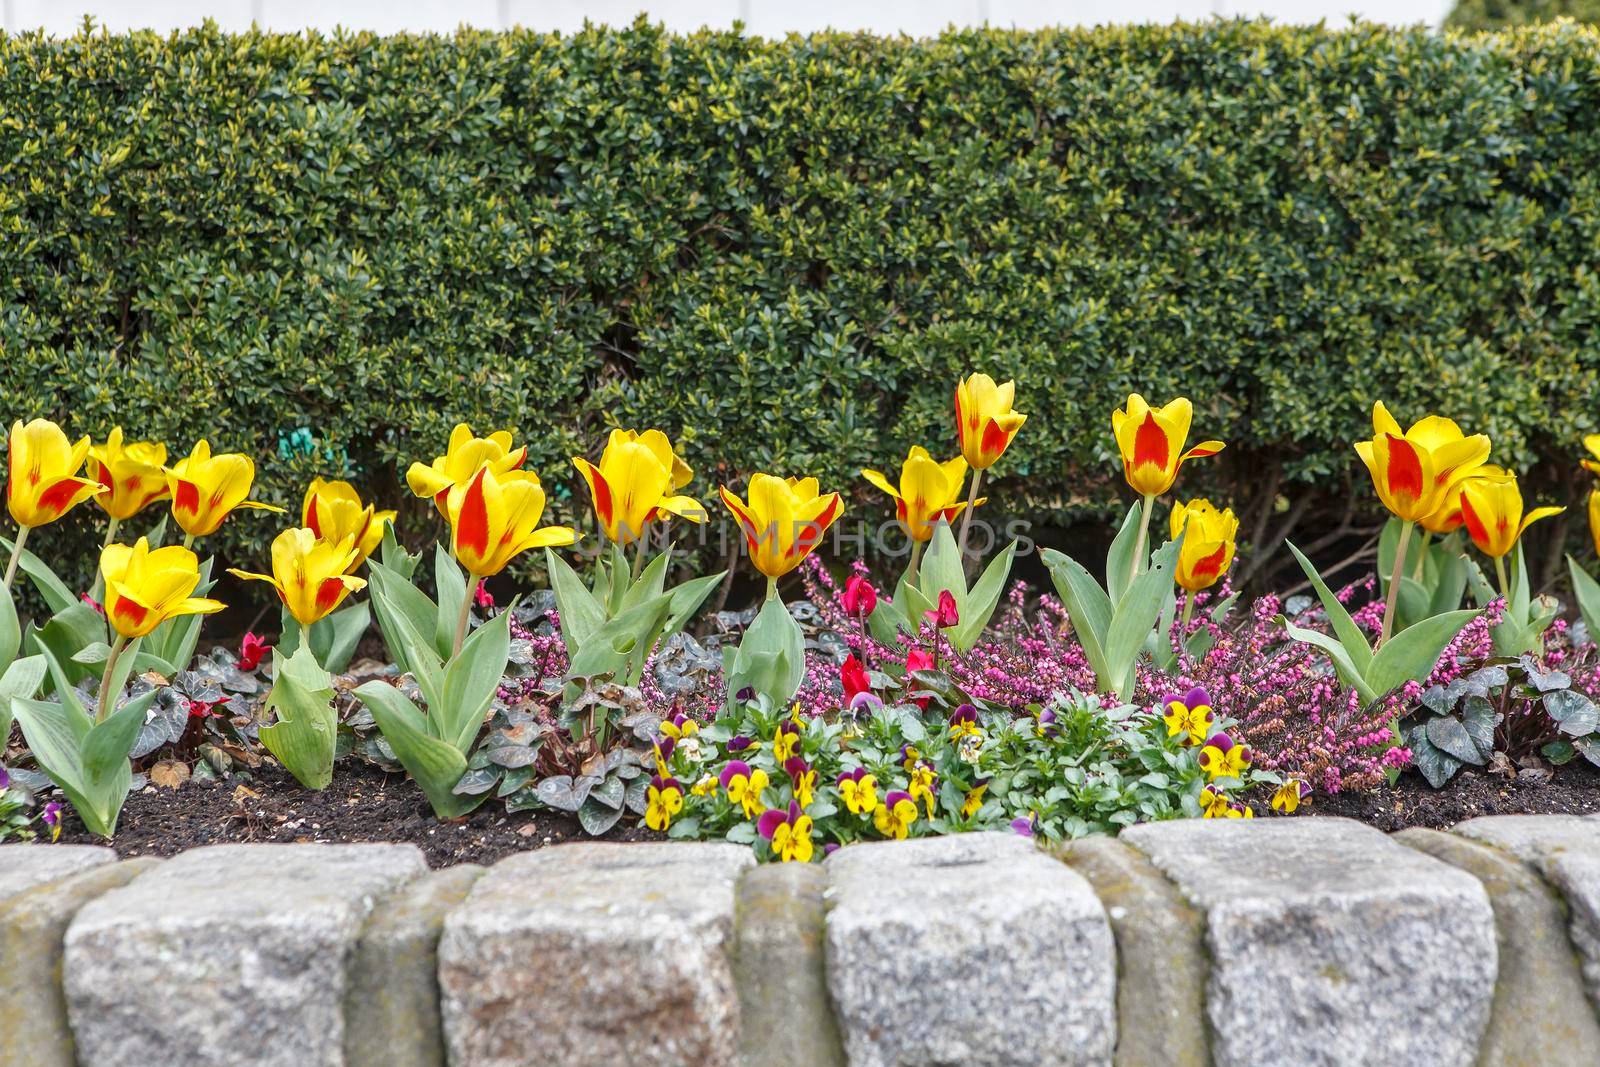 Yellow-red tulips are planted in a row on a stone parapet against the backdrop of an evergreen topiary yew wall. Fence